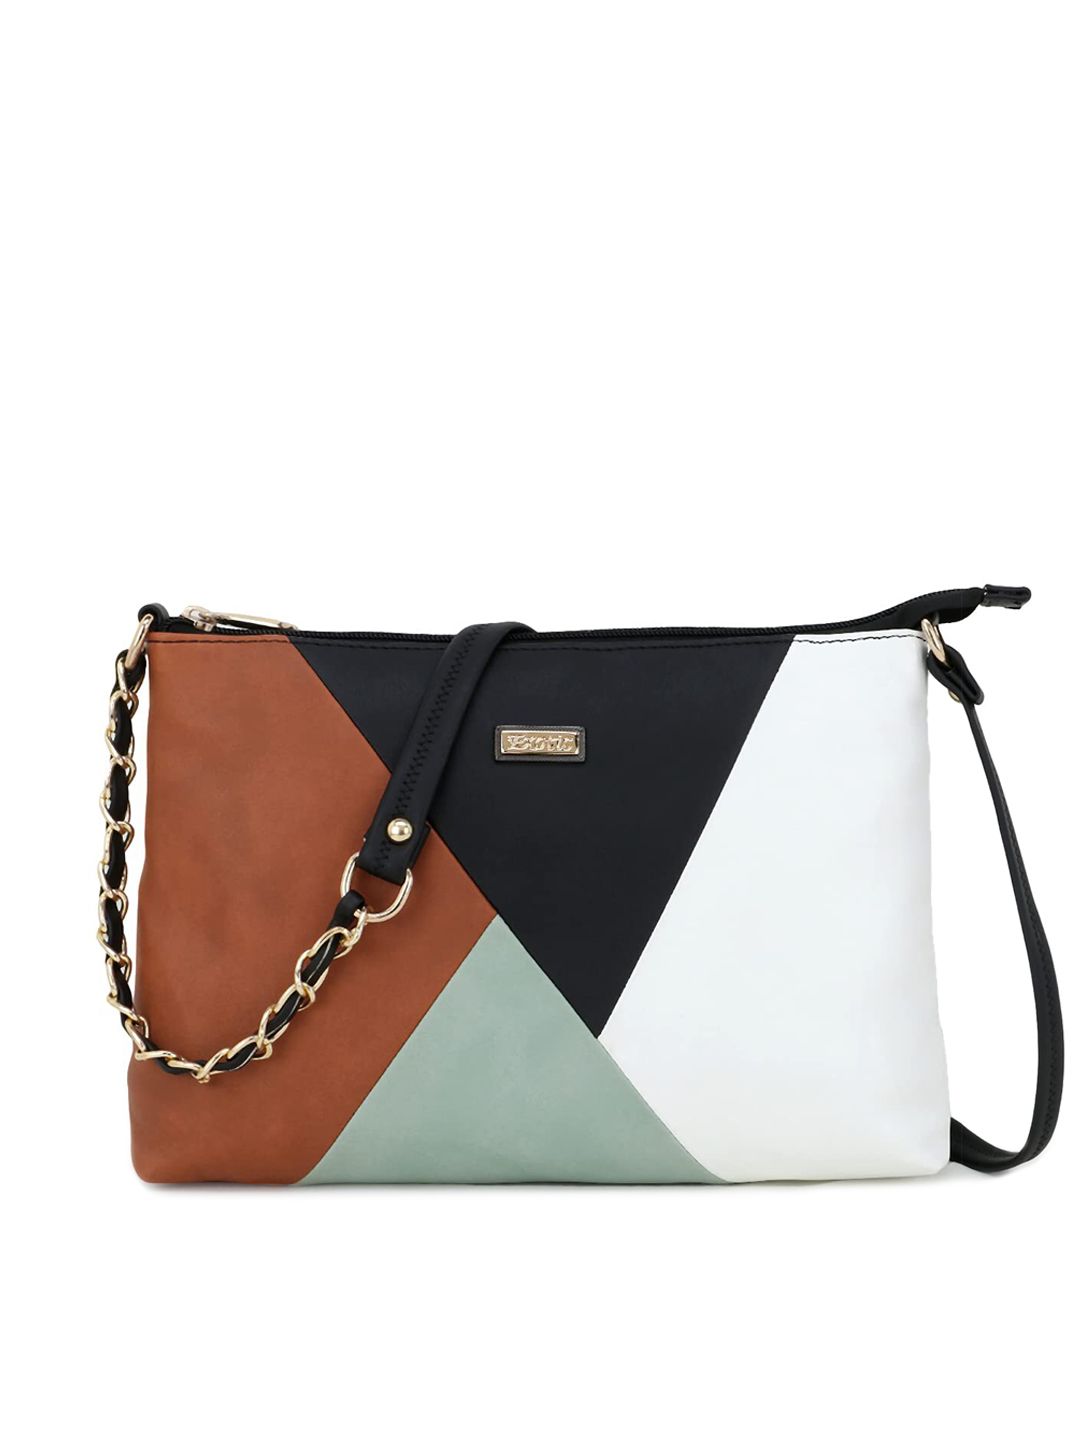 Exotic Black Colourblocked PU Structured Sling Bag Price in India